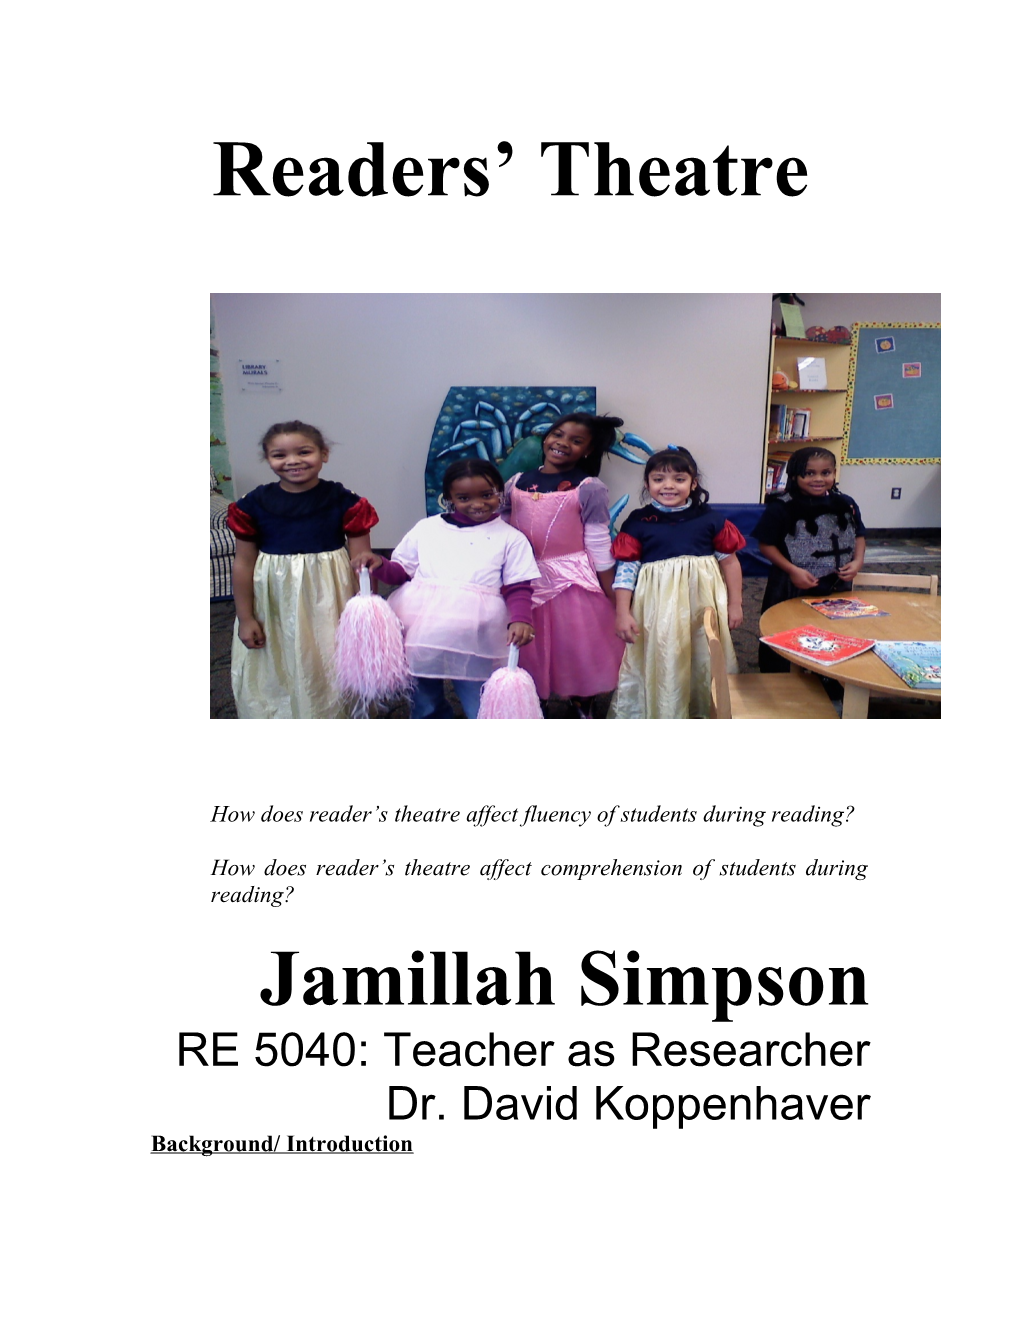 How Does Reader S Theatre Affect Fluency of Students During Reading?